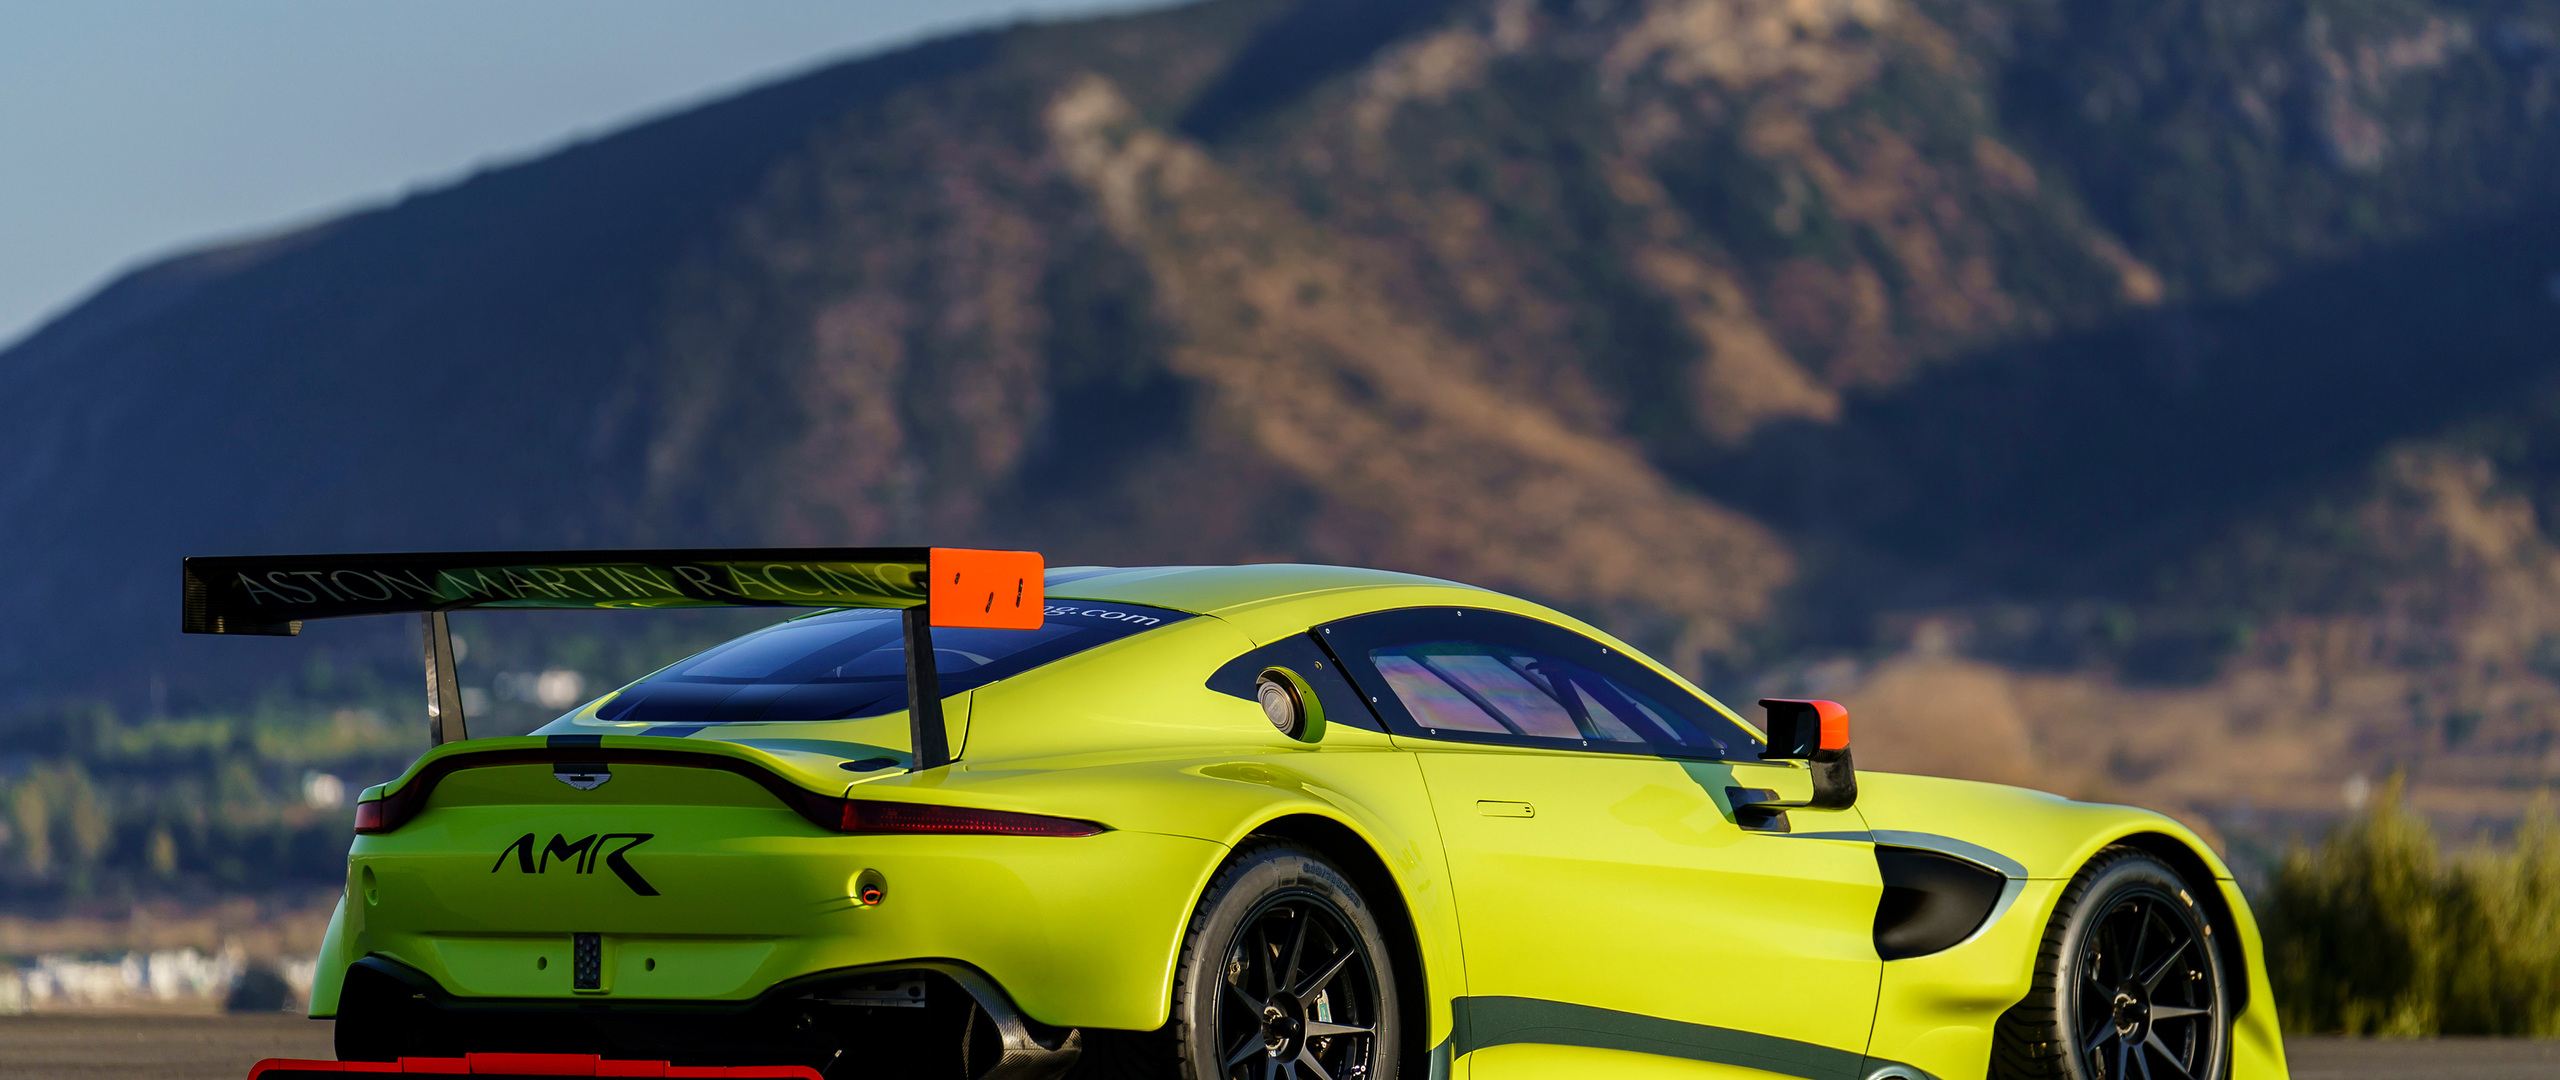 2560x1080 Aston Martin Vantage Back 4k 2560x1080 Resolution Hd 4k Wallpapers Images Backgrounds Photos And Pictures